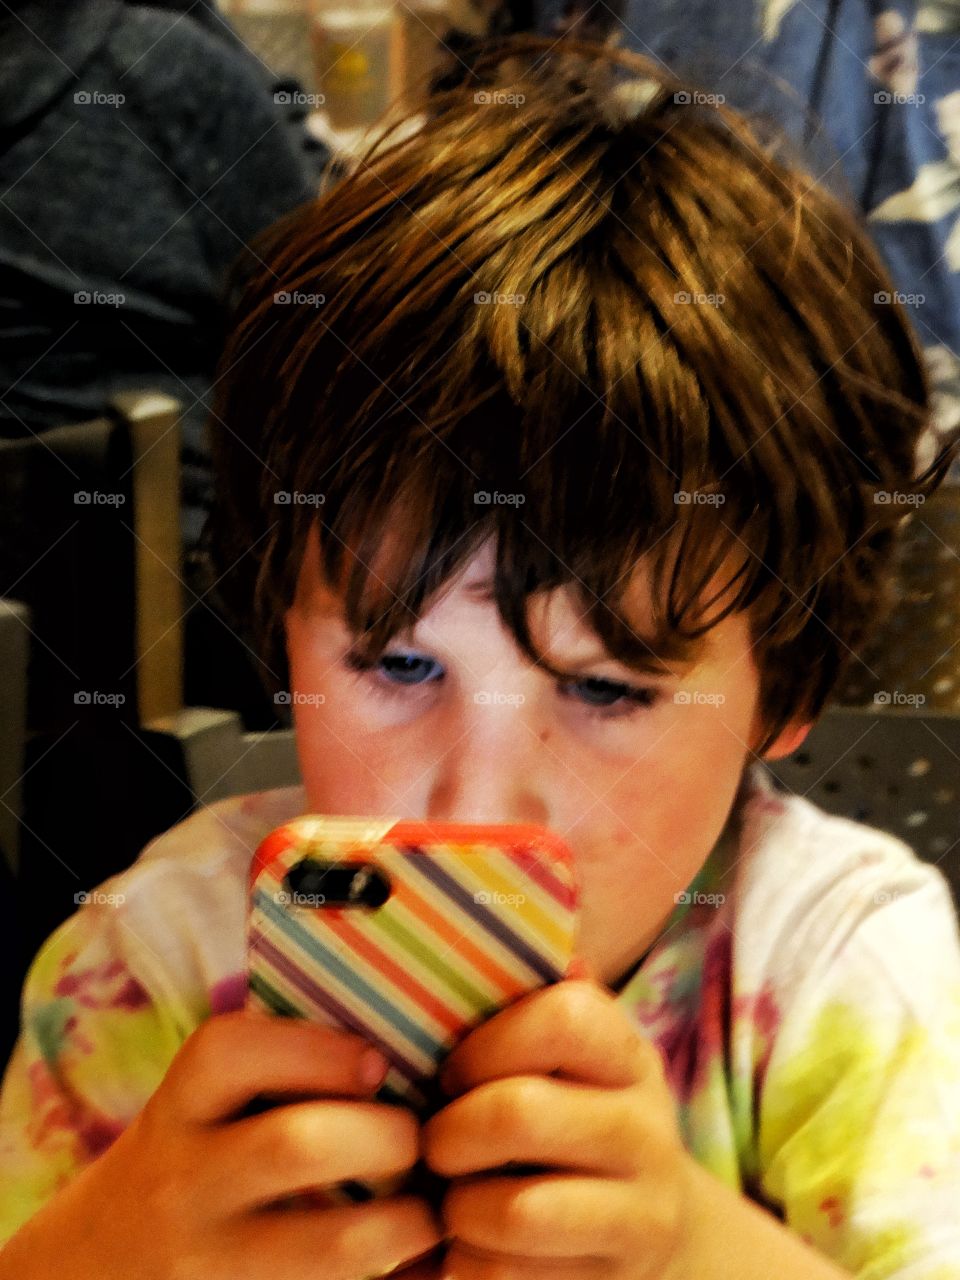 Young Boy Using A Smartphone
